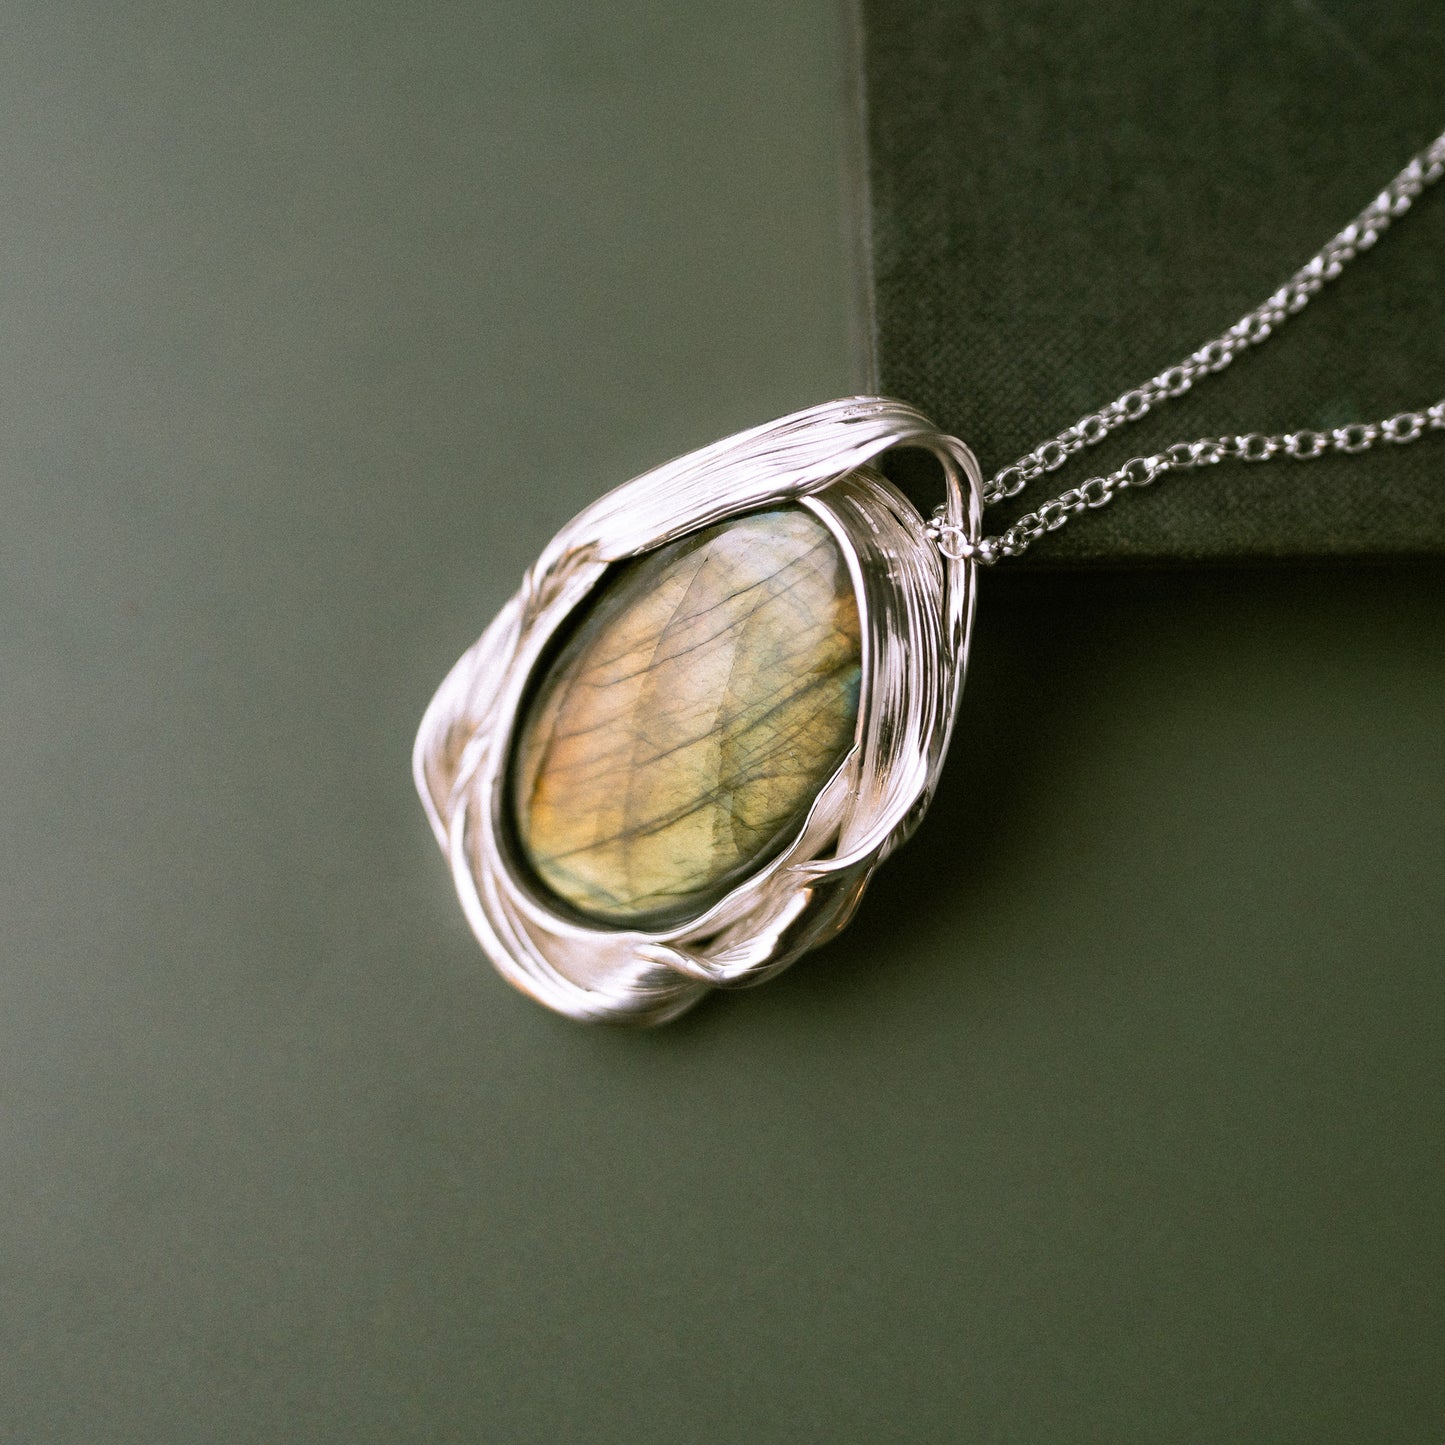 One of a Kind Long Sterling Silver Drift Necklace with Labradorite